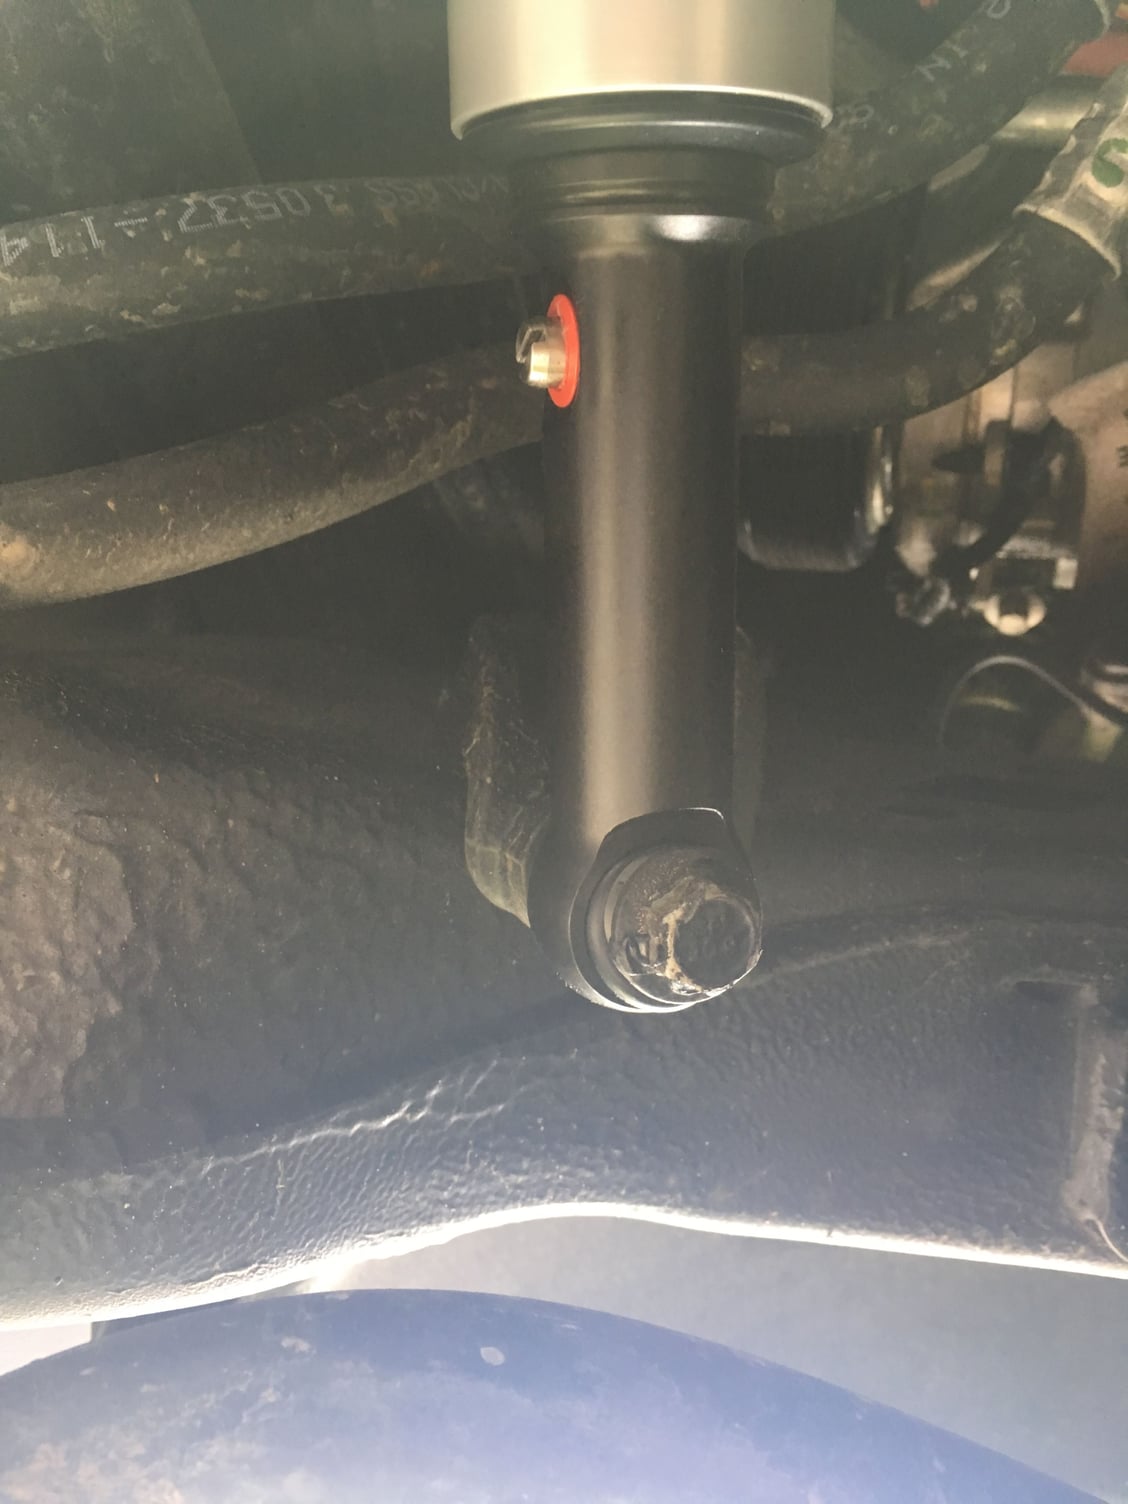 Steering arm stabilizer - Page 2 - Ford Truck Enthusiasts Forums